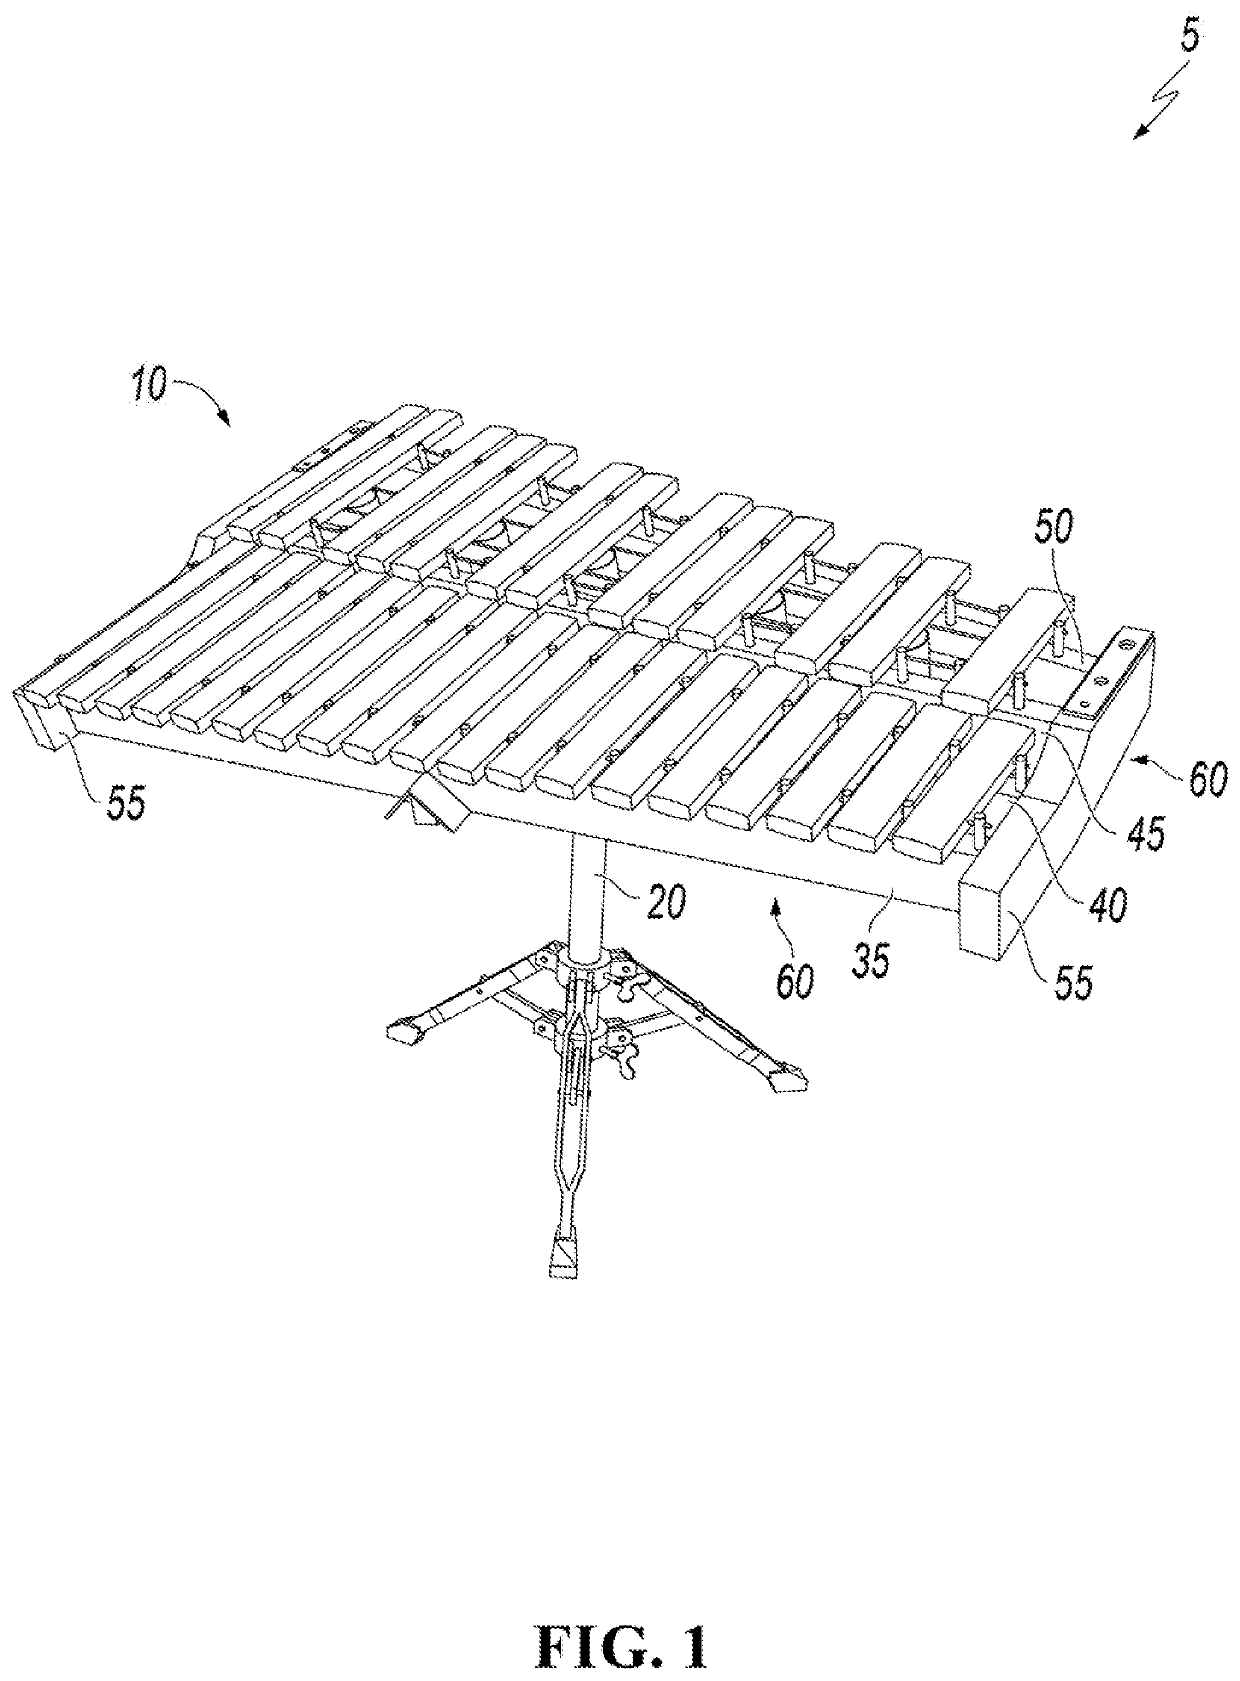 System for support and resonation of a musical instrument